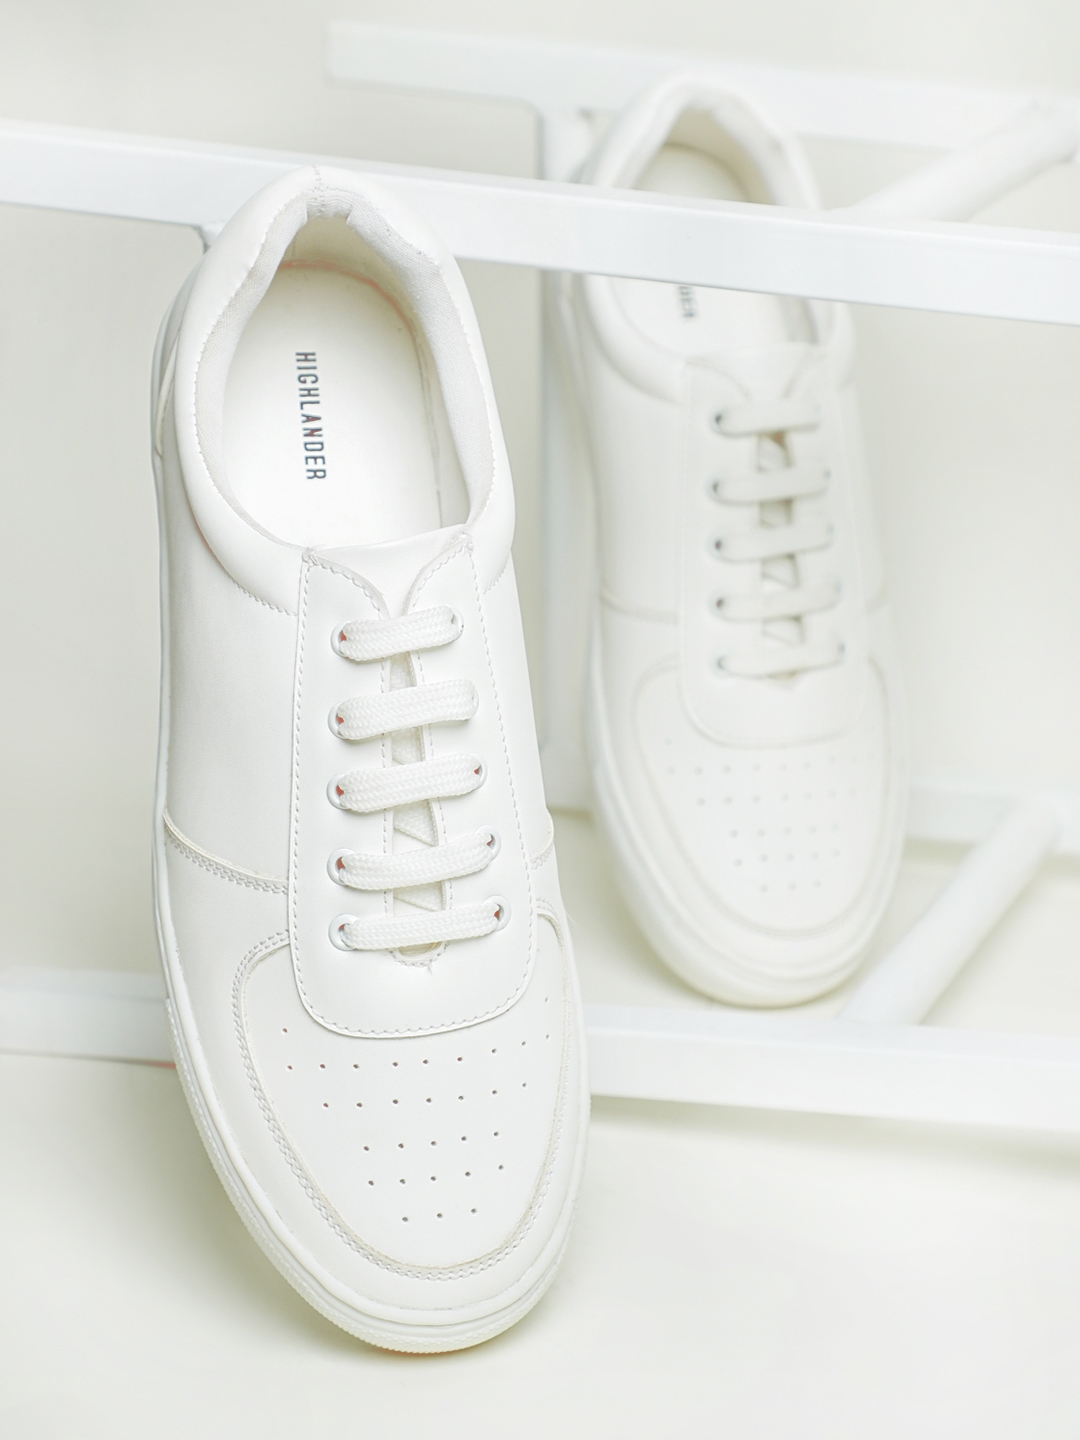 Our Legacy - Highlander Sneaker White Collapse Leather | Our Legacy-sonxechinhhang.vn